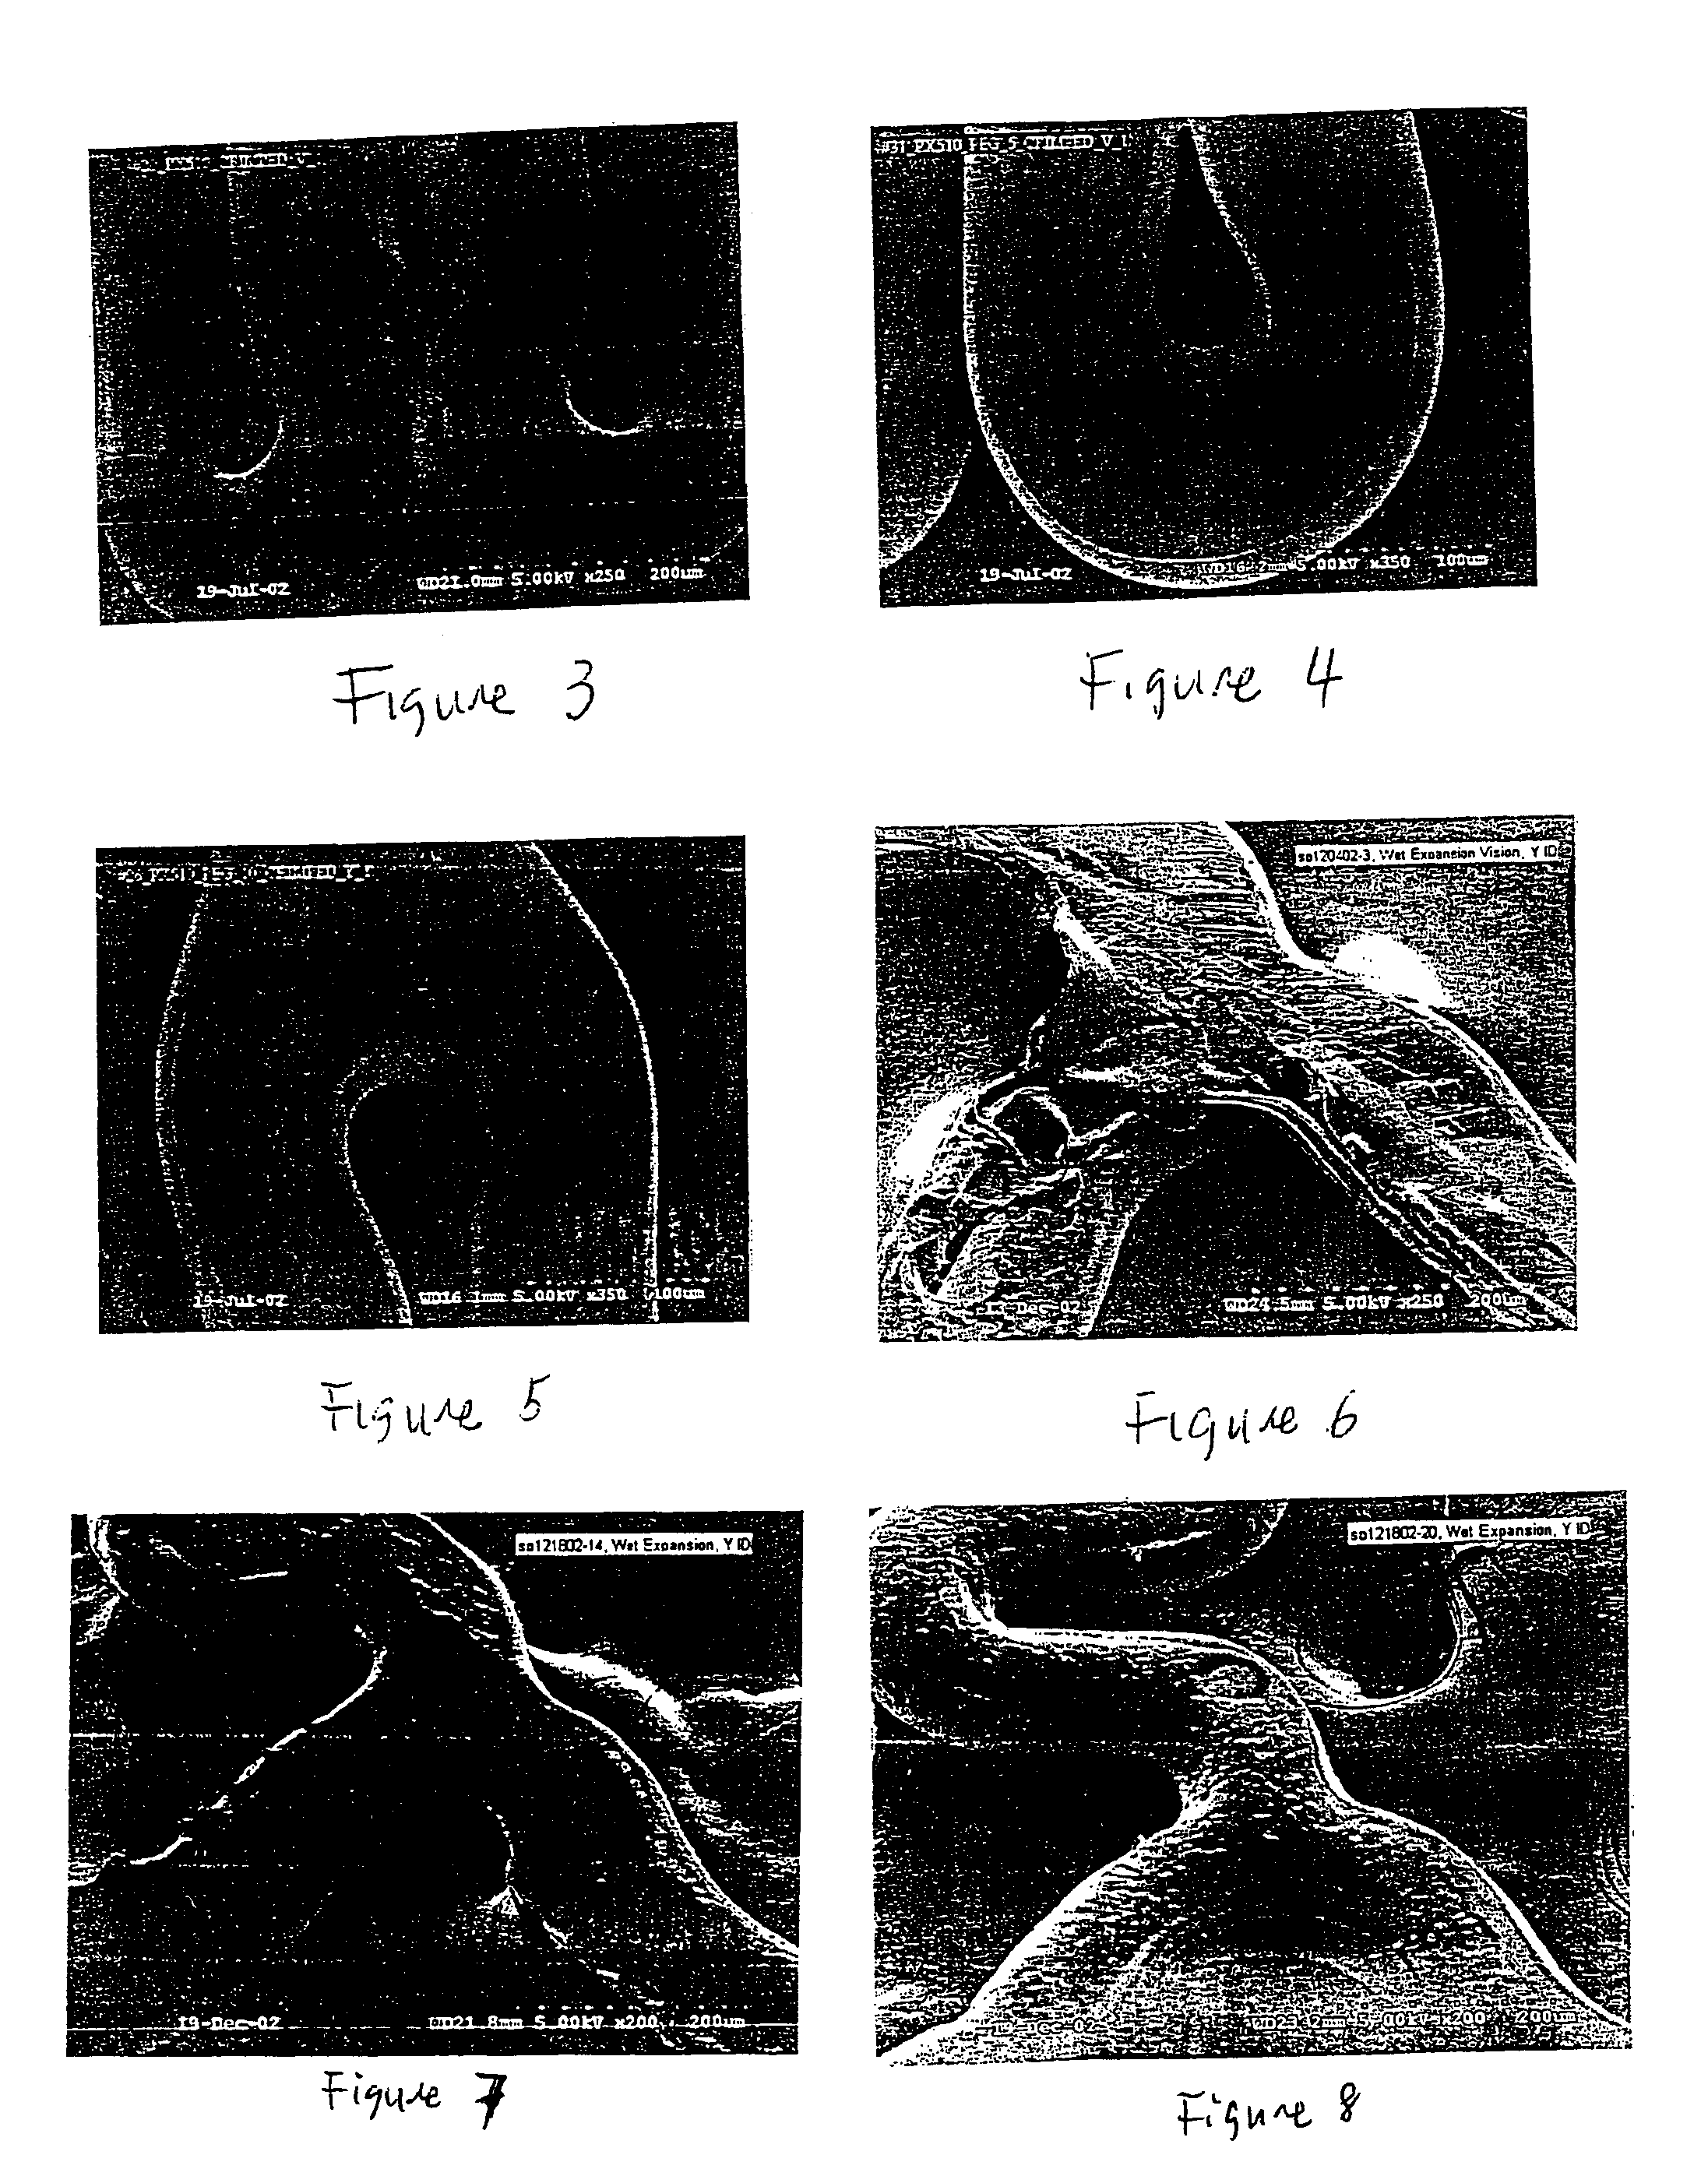 Methods for modulating thermal and mechanical properties of coatings on implantable devices